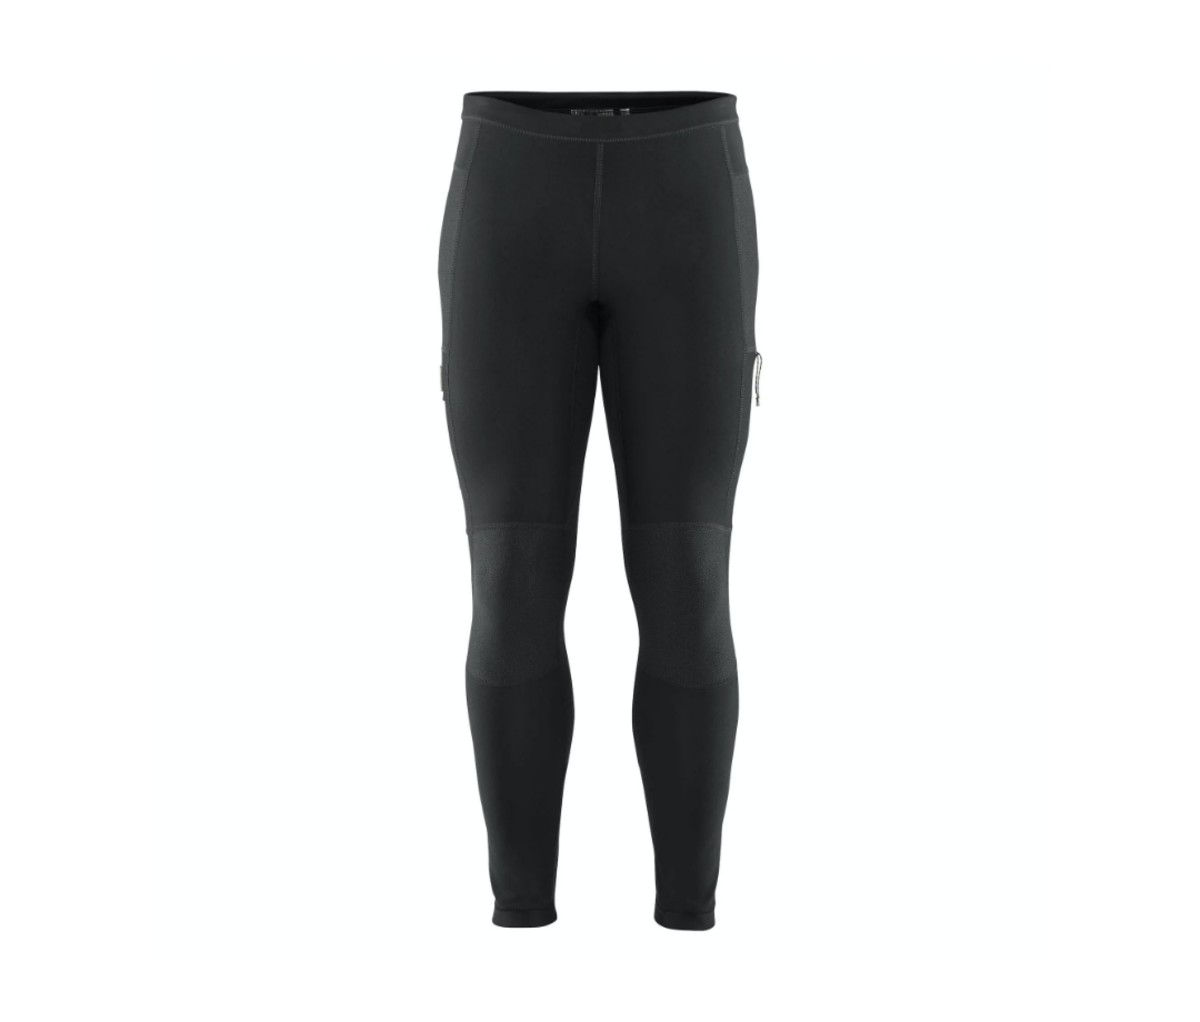 3 Easy Ways to Wear Men's Running Tights - wikiHow